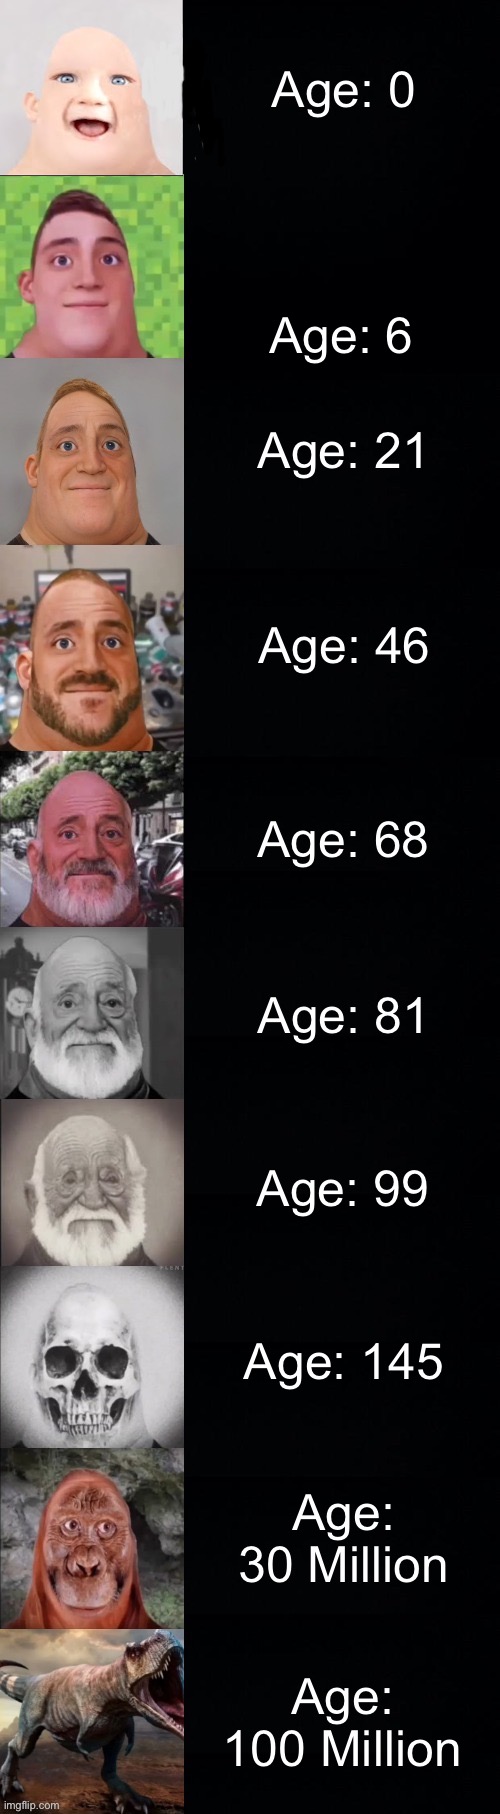 Mr Incredible Becoming Old: Your Age | Age: 0; Age: 6; Age: 21; Age: 46; Age: 68; Age: 81; Age: 99; Age: 145; Age: 30 Million; Age: 100 Million | image tagged in mr incredible becoming old | made w/ Imgflip meme maker